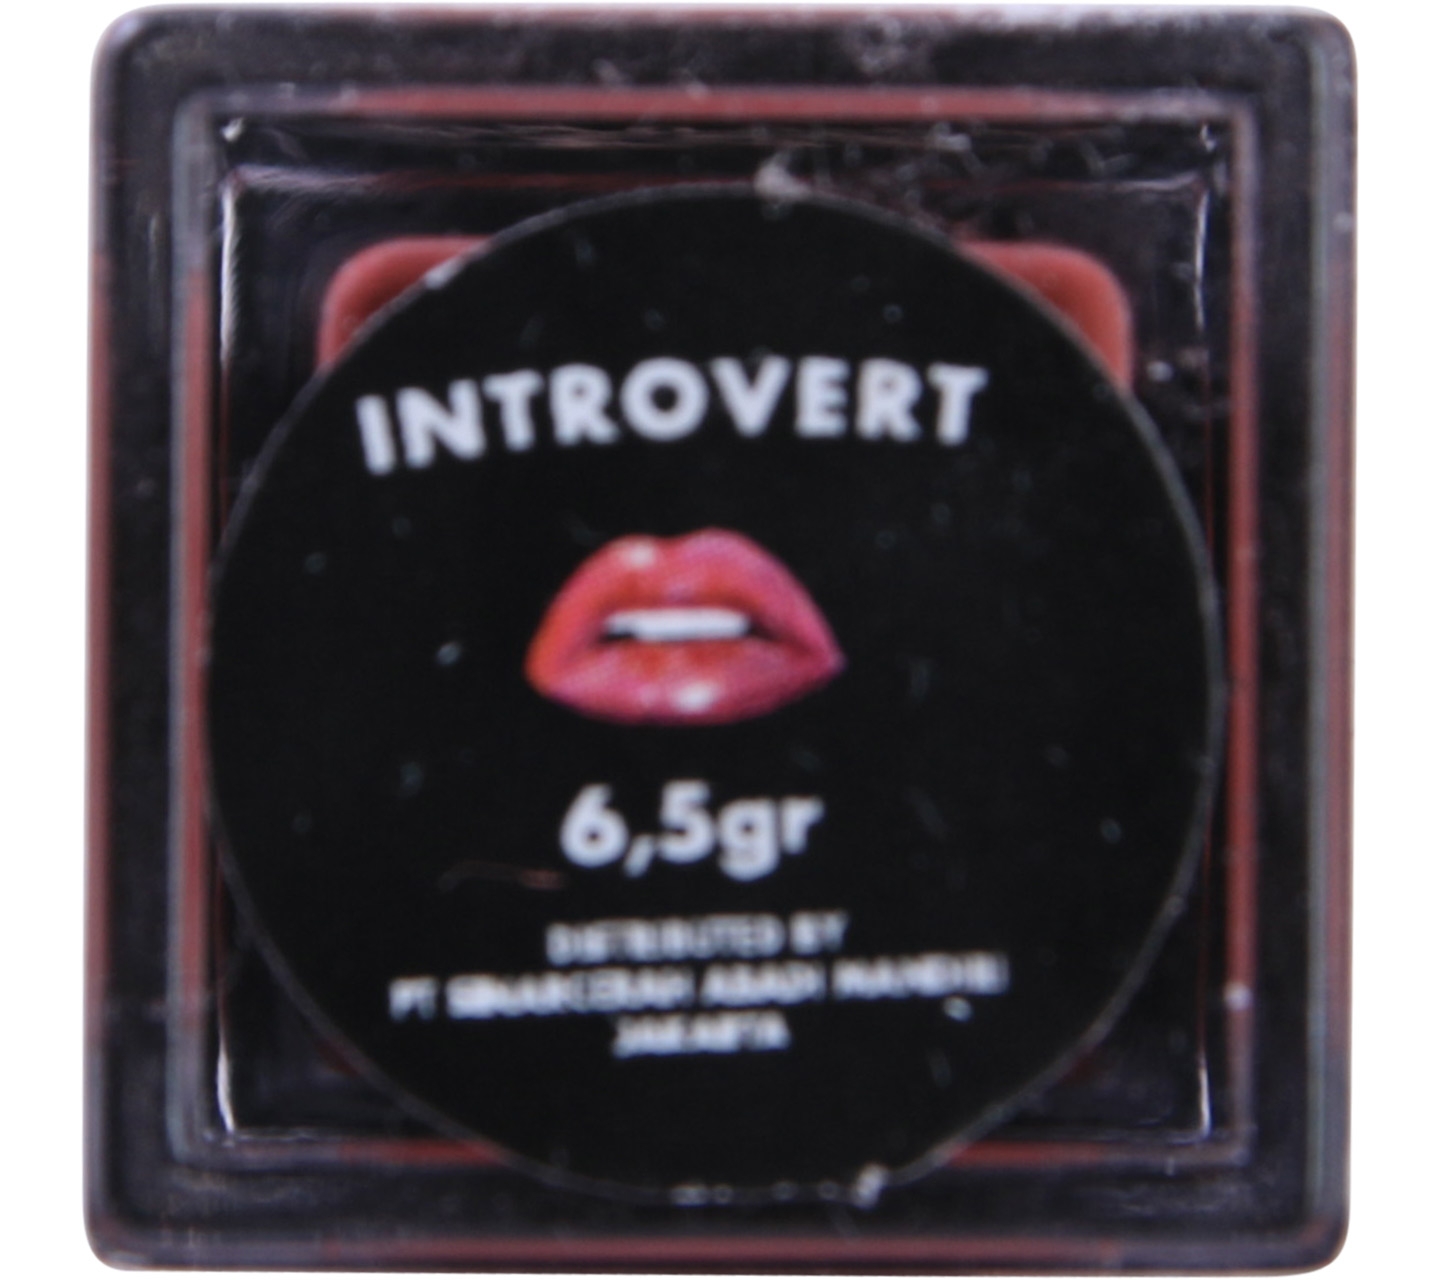 MAD For Lipstick Introvert Lips